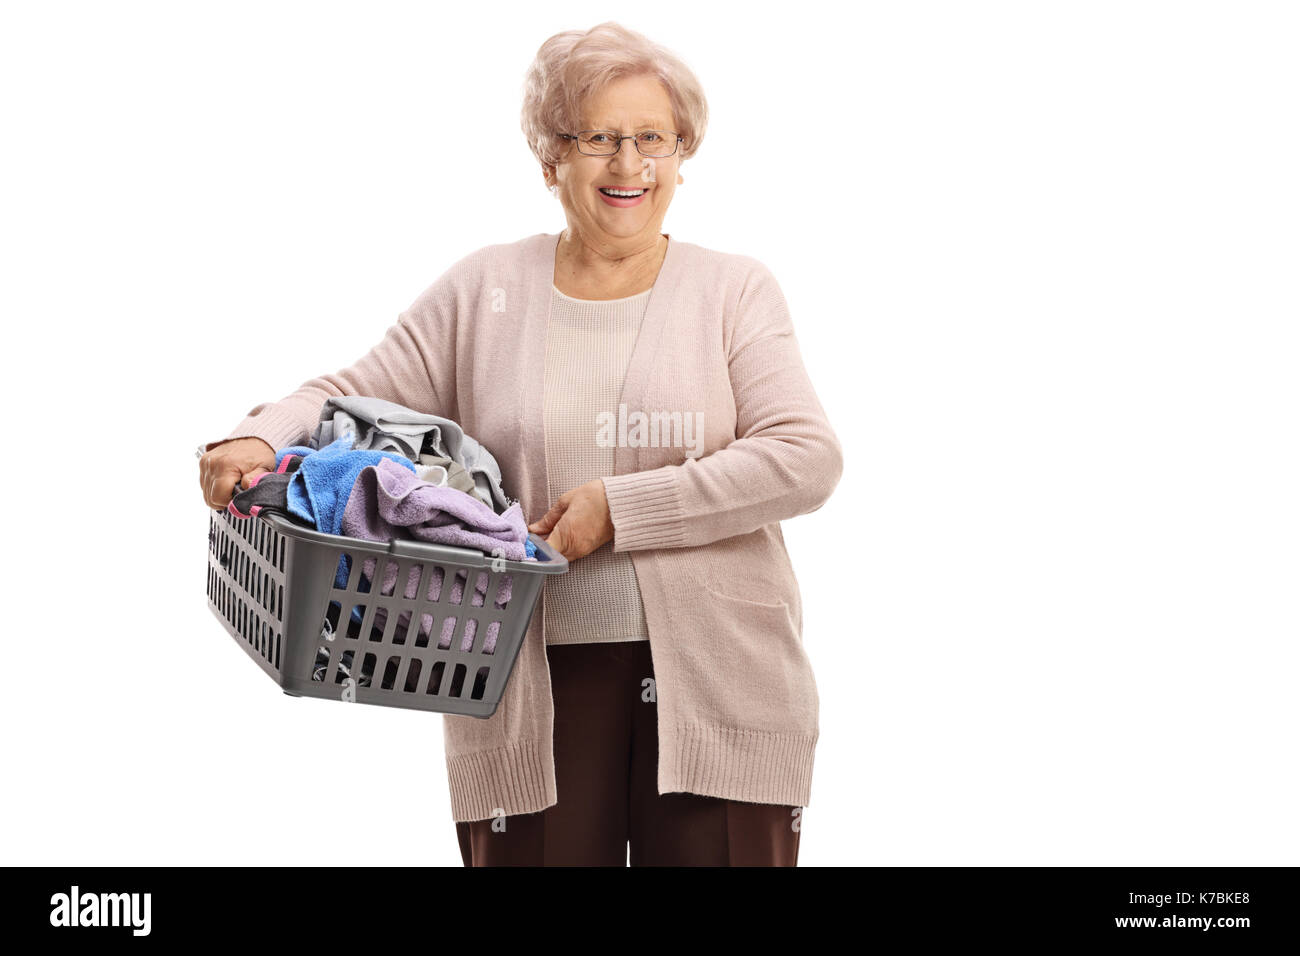 Elderly woman holding a laundry basket filled with clothes isolated on white background Stock Photo